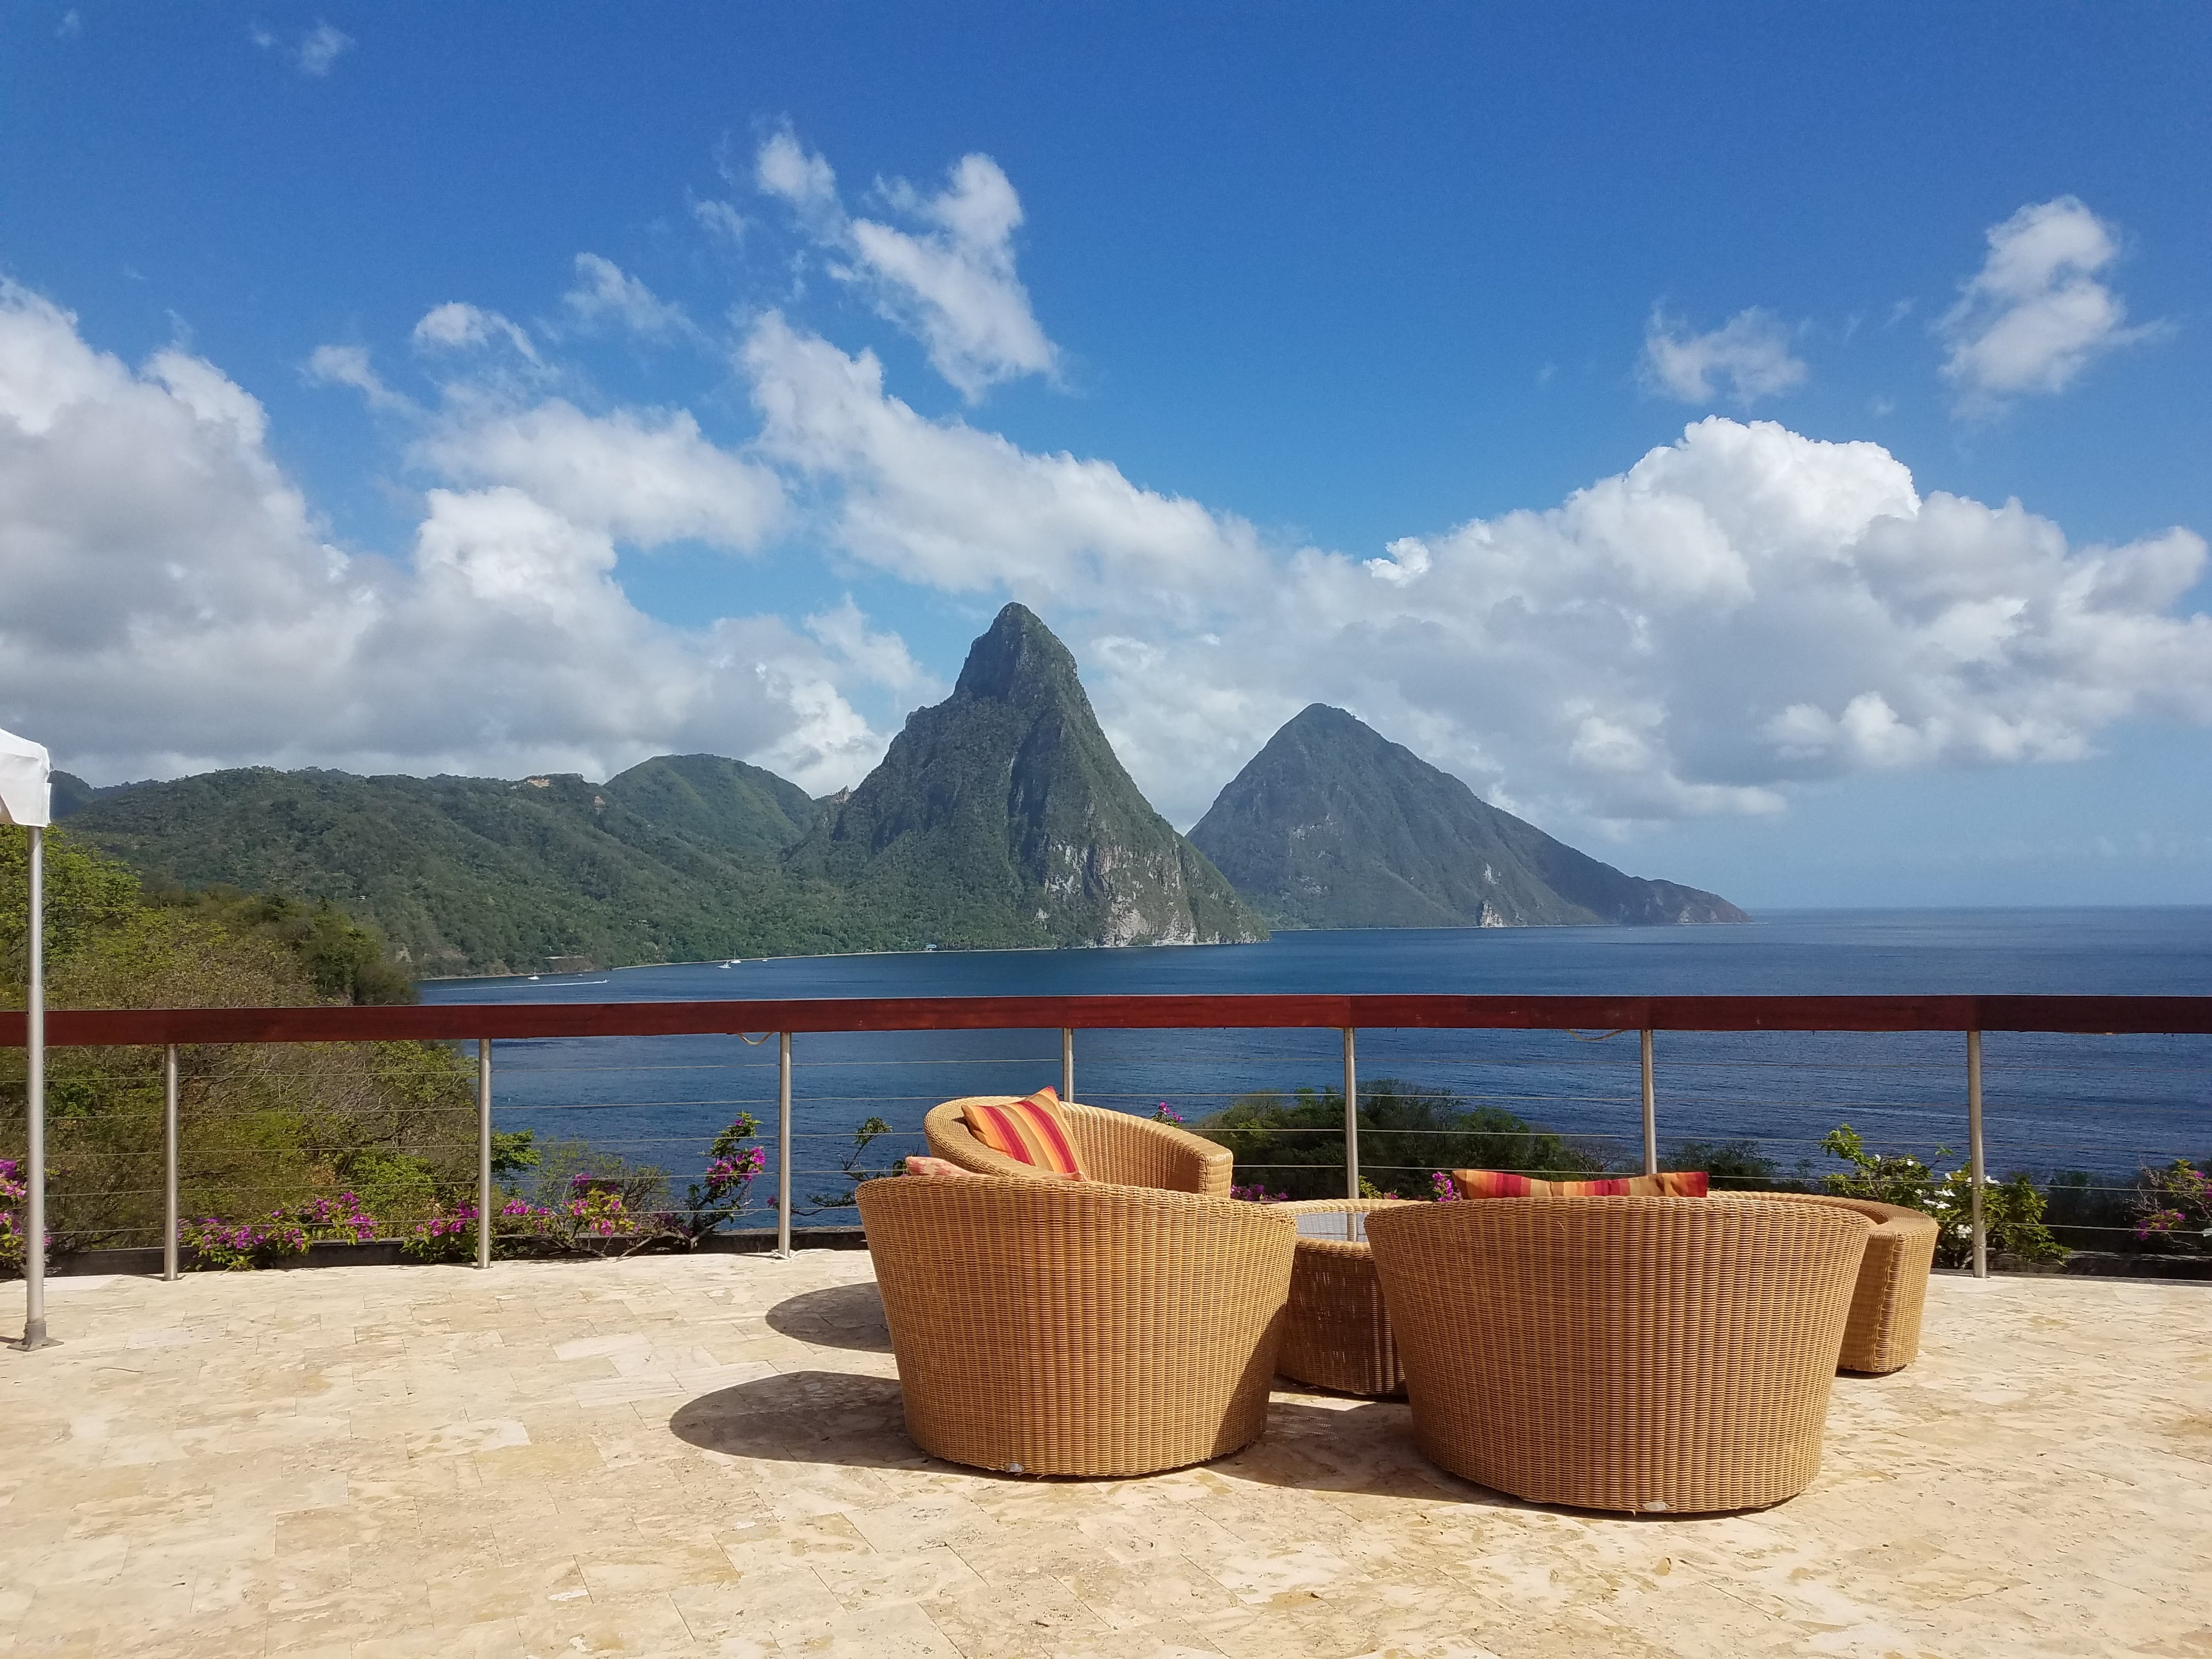 Highlights From A Visit To Saint Lucia During The 2018 St. Lucia Jazz Festival